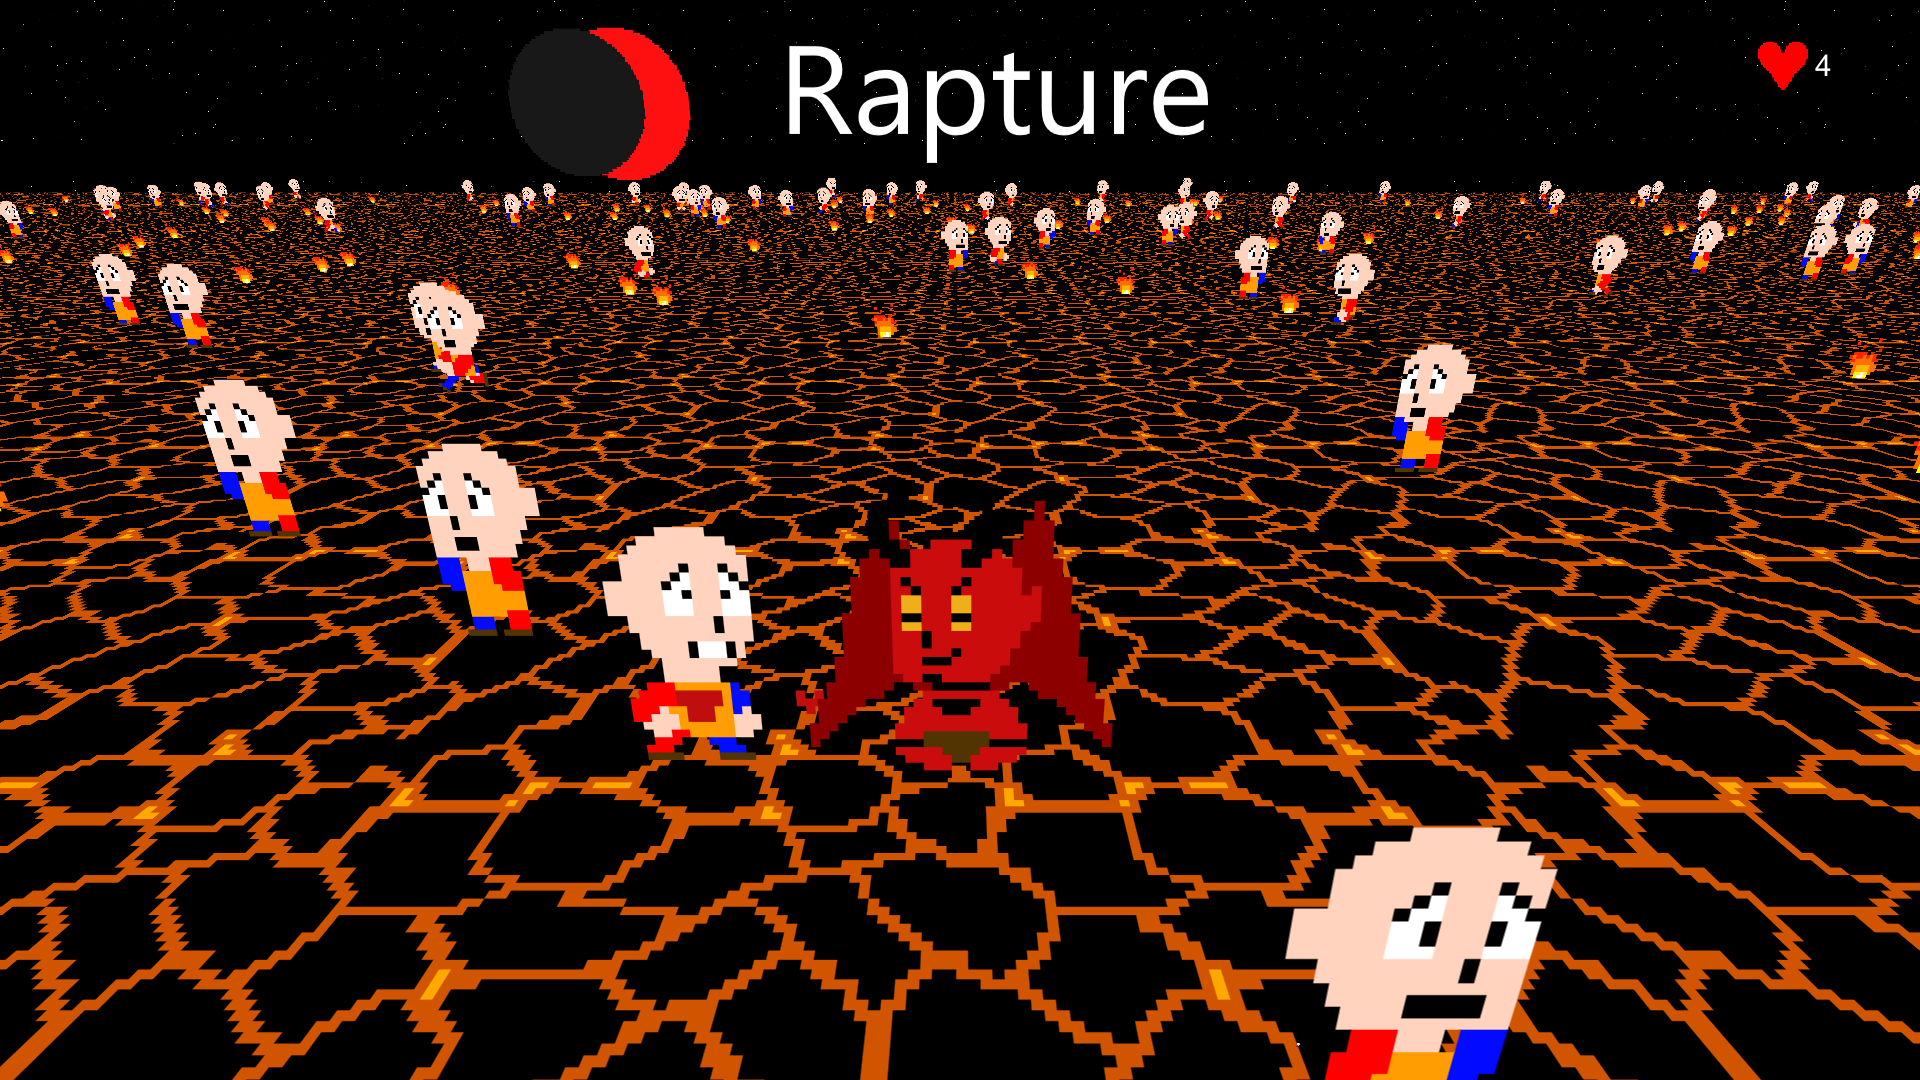 Rapture - Sacrifices must be made Windows game - IndieDB